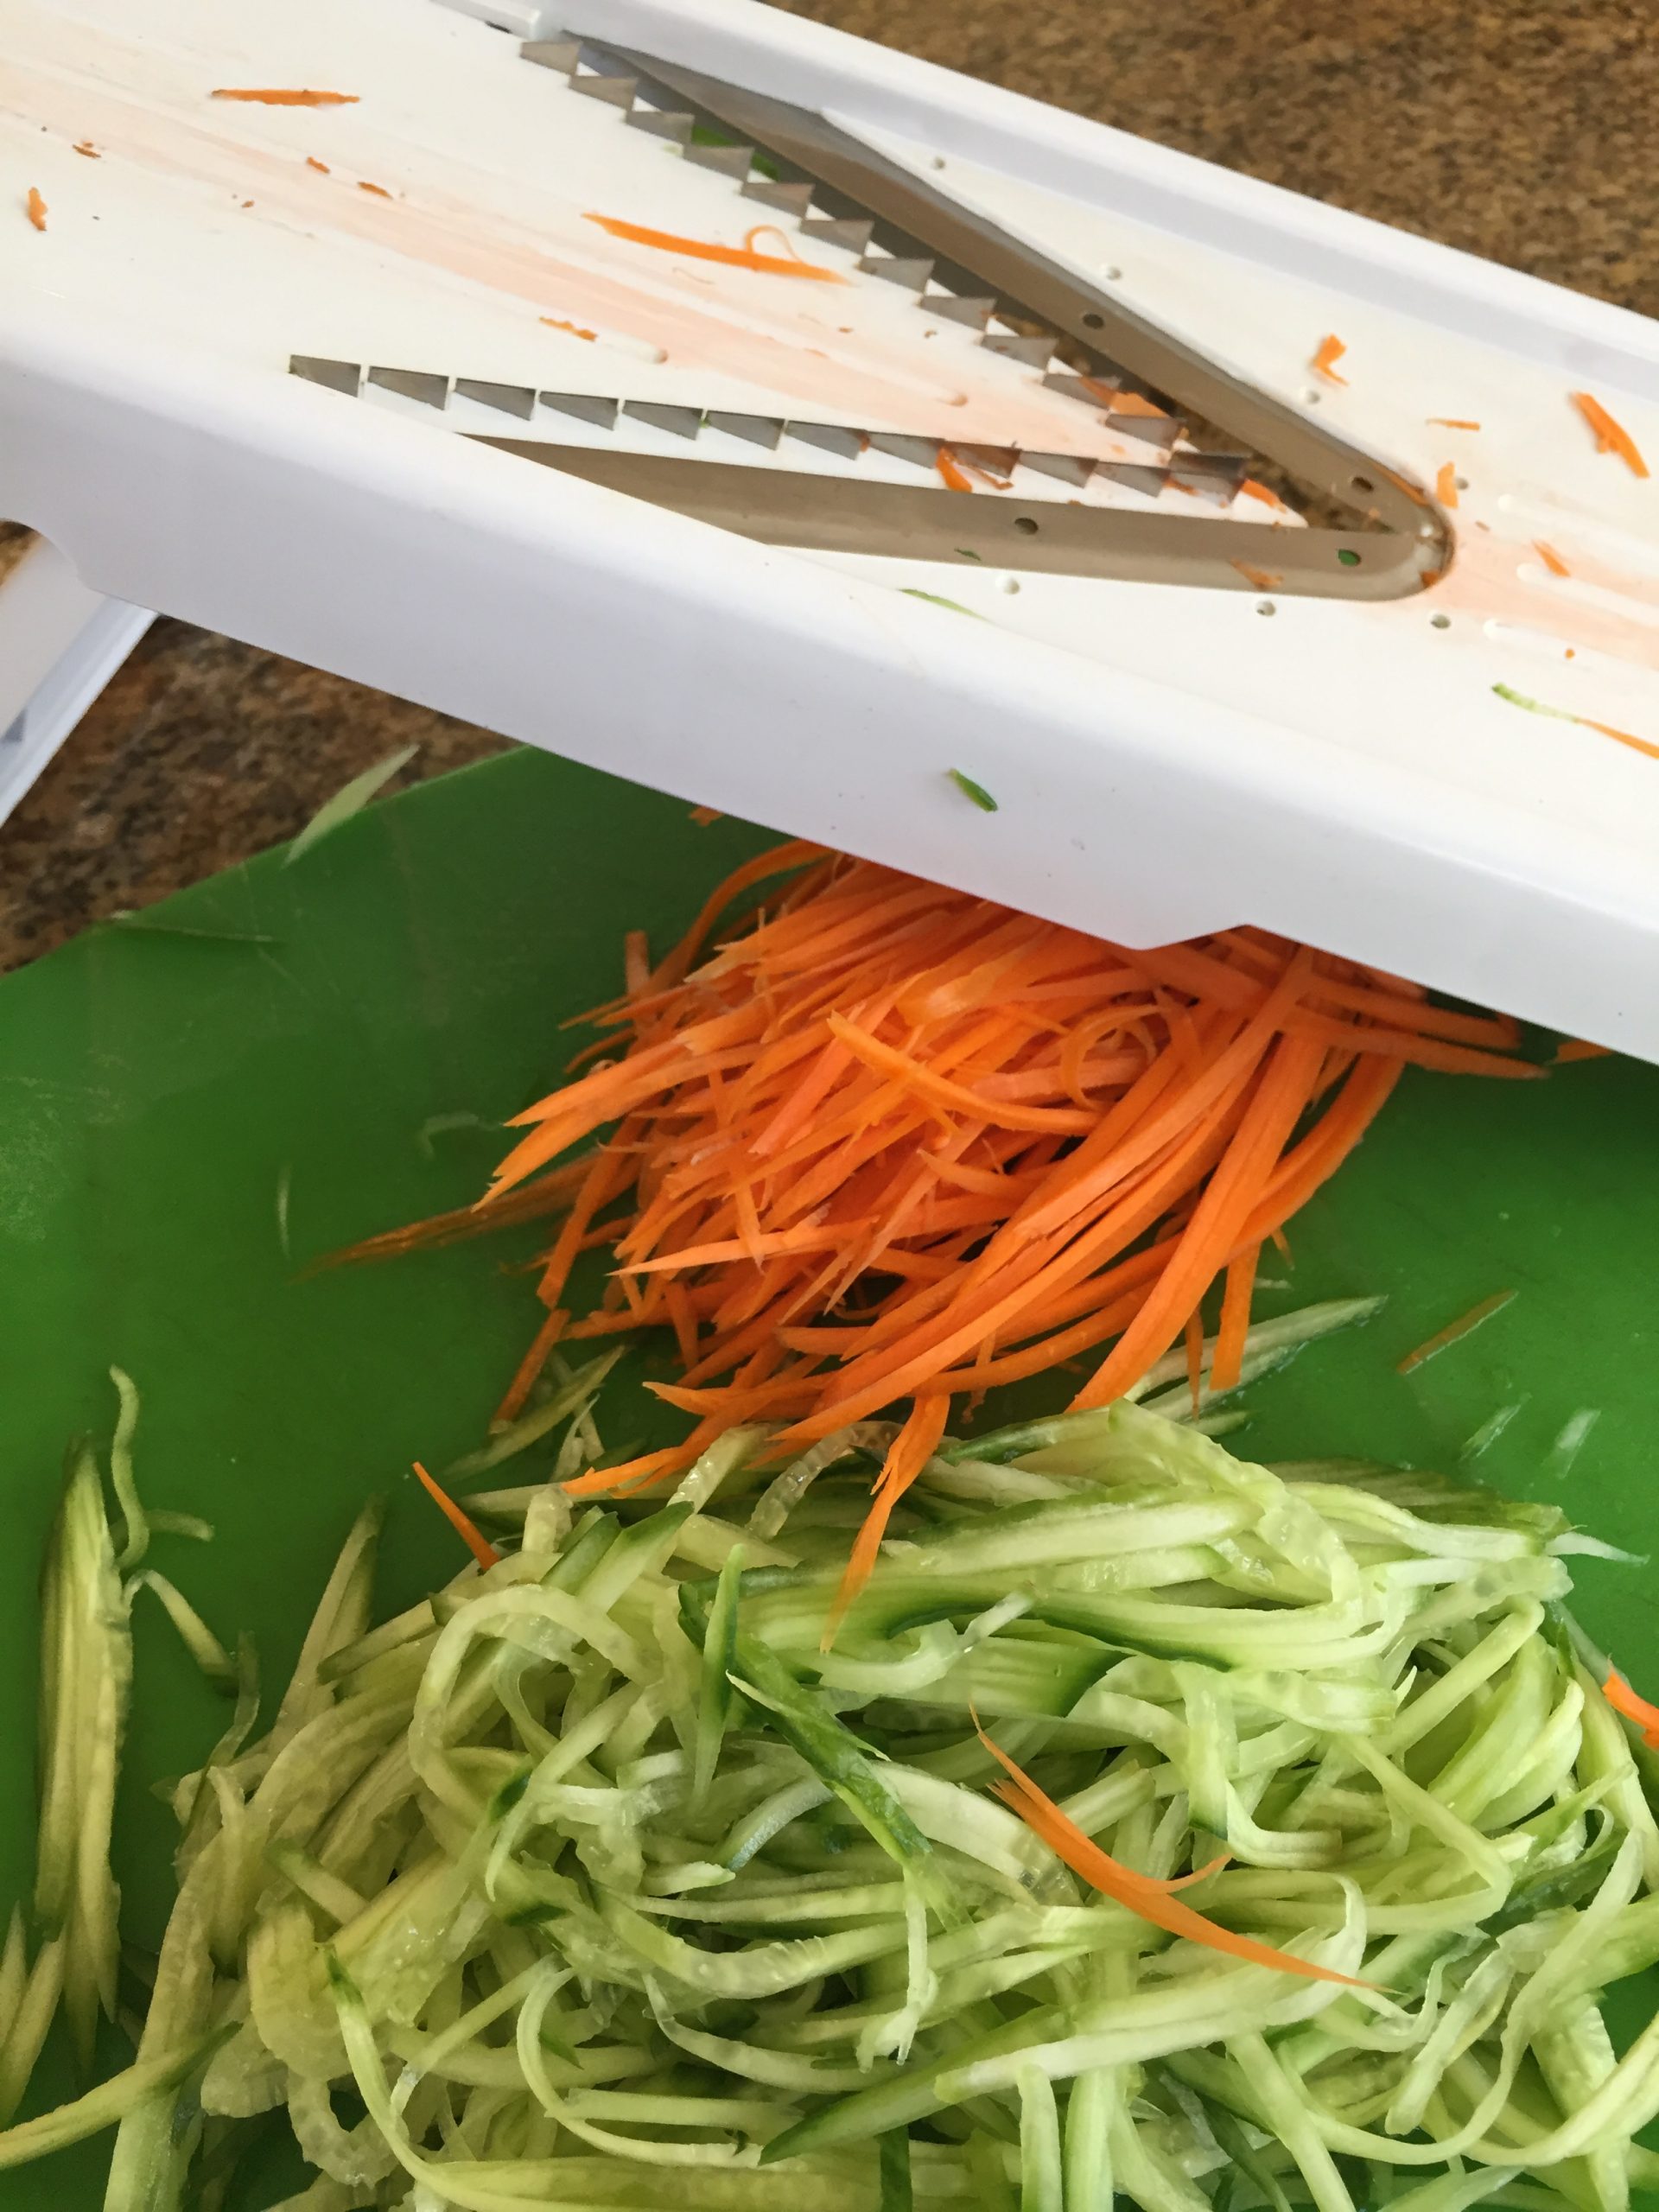 Julienne cut carrots and cucumber with mandoline slicer